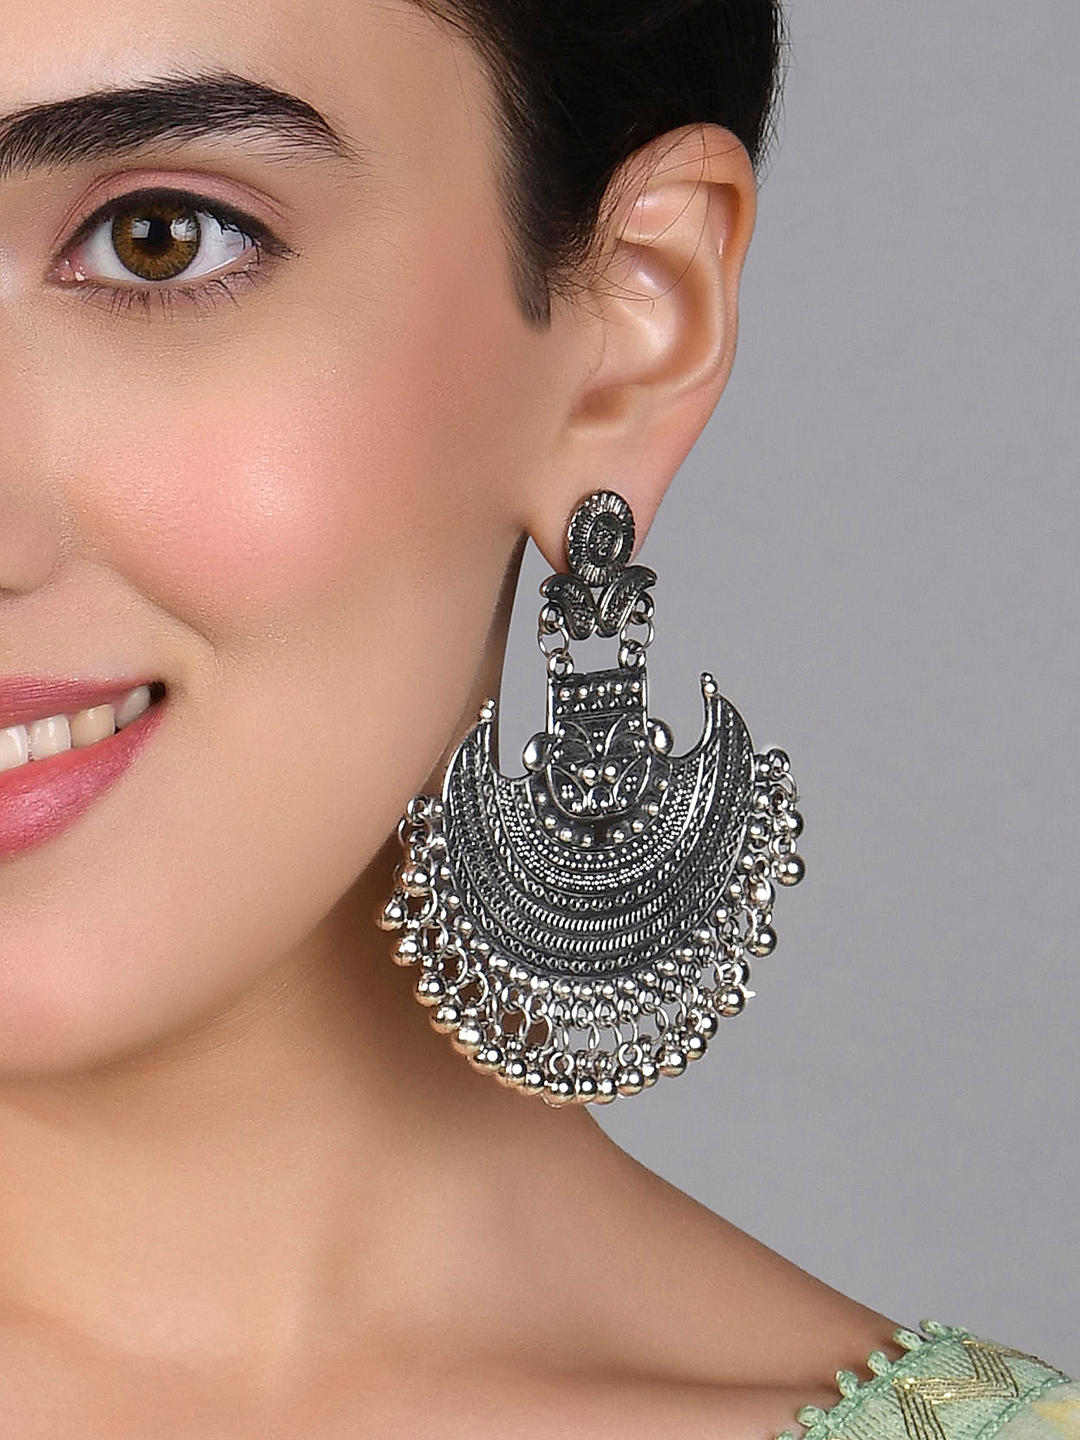 Exclusive 925 sterling silver Handmade vintage ethnic style hoops earrings  Kundal unisex tribal stylish unique Bali jewelry India ear1236 | TRIBAL  ORNAMENTS